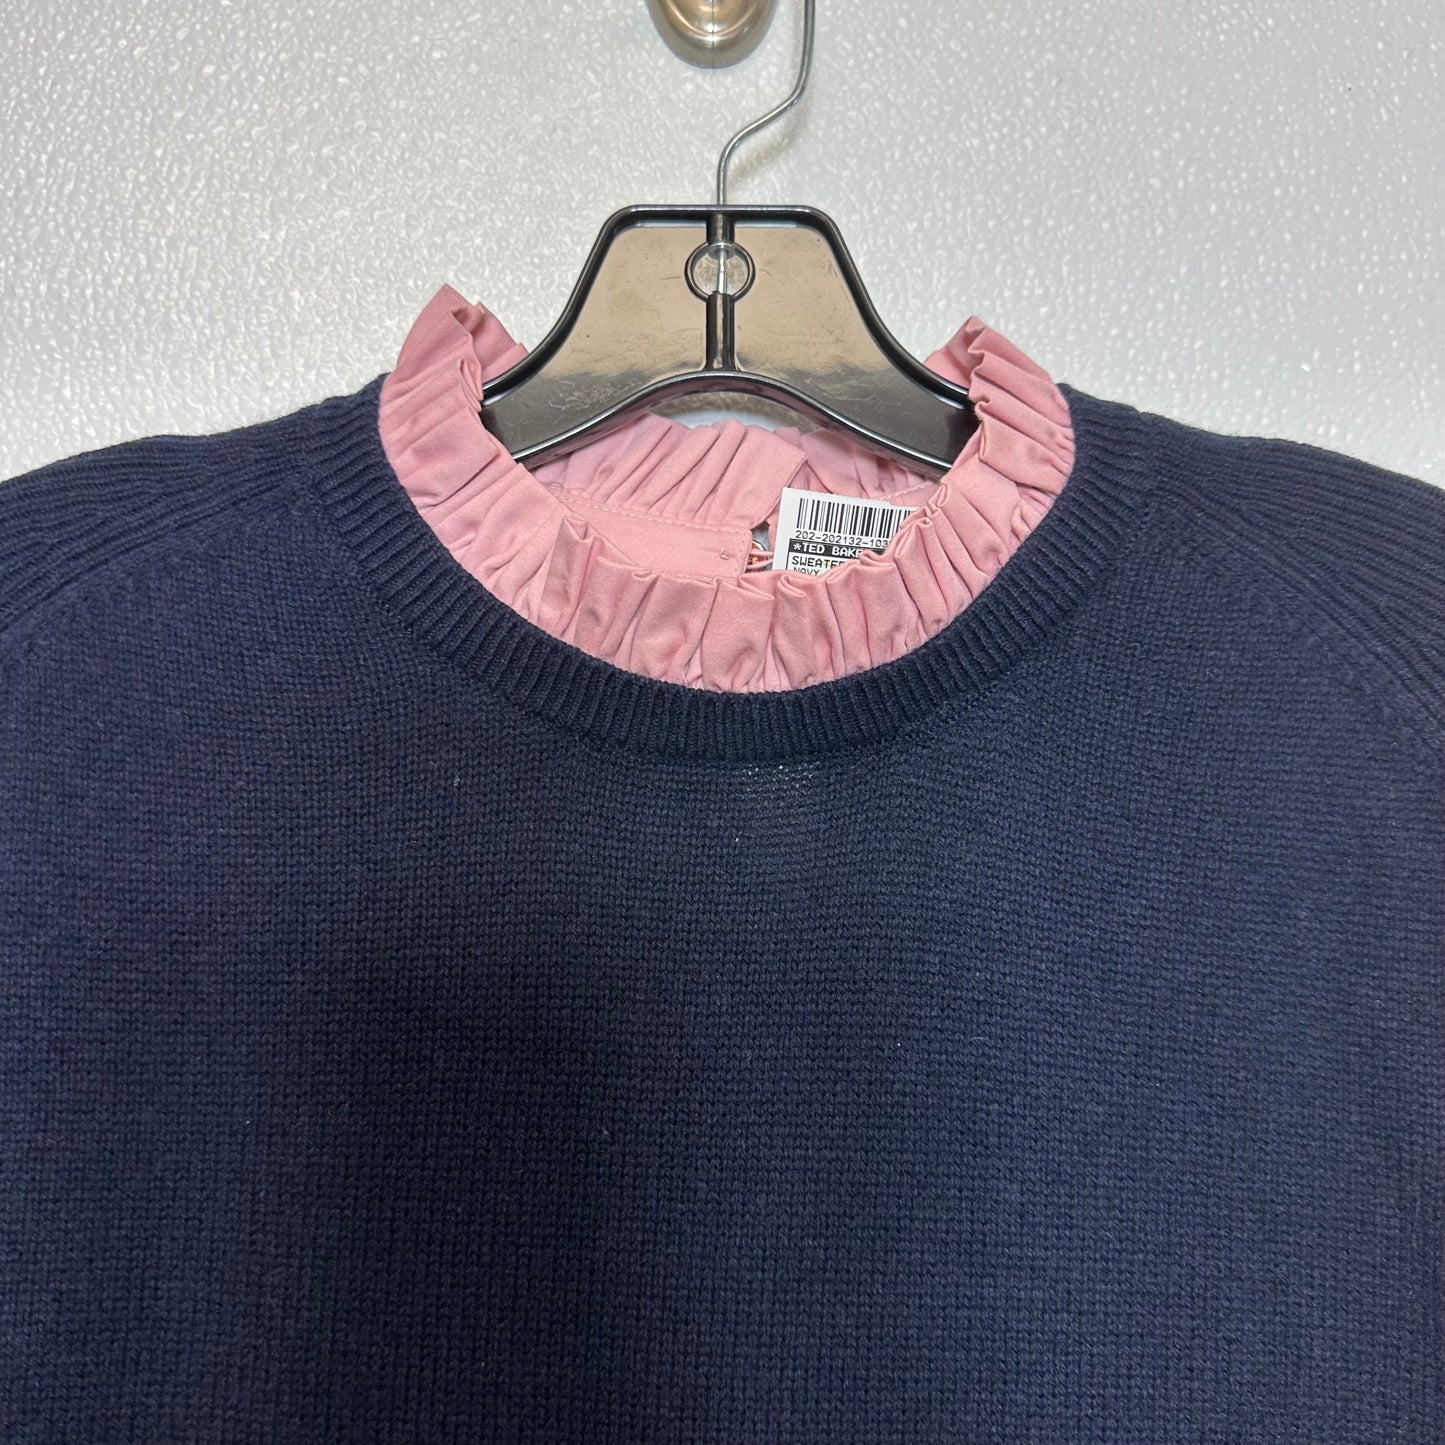 Sweater By Ted Baker  Size: S